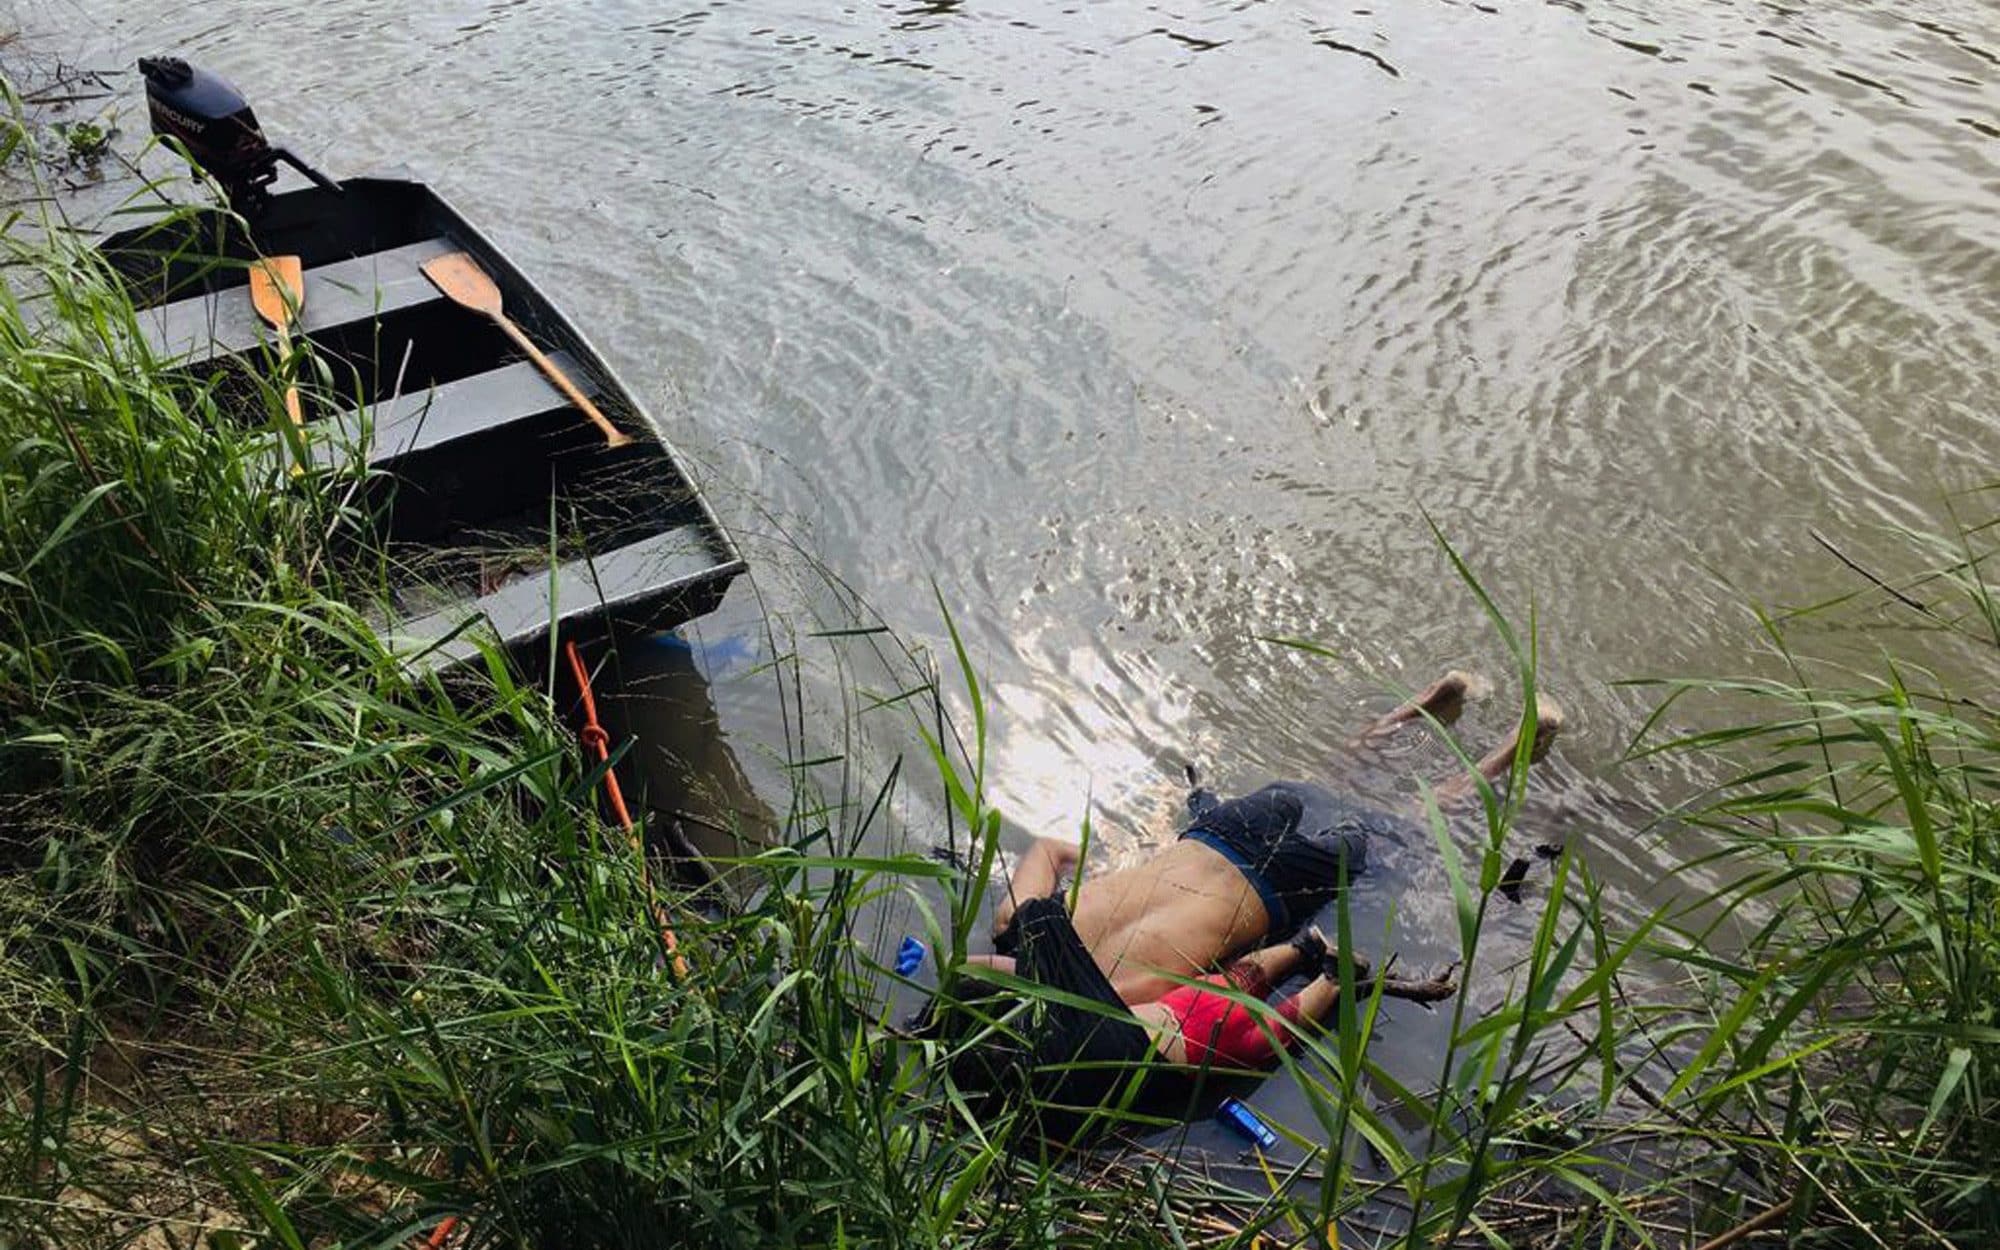 The bodies of Salvadoran migrant Oscar Alberto Martínez Ramírez and his nearly 2-year-old daughter Valeria lie on the bank of the Rio Grande in Matamoros, Mexico, Monday, June 24, 2019, after they drowned trying to cross the river to Brownsville, Texas. Martinez’s wife, Tania, told Mexican authorities she watched her husband and child disappear in the strong current. Julia Le Duc/AP